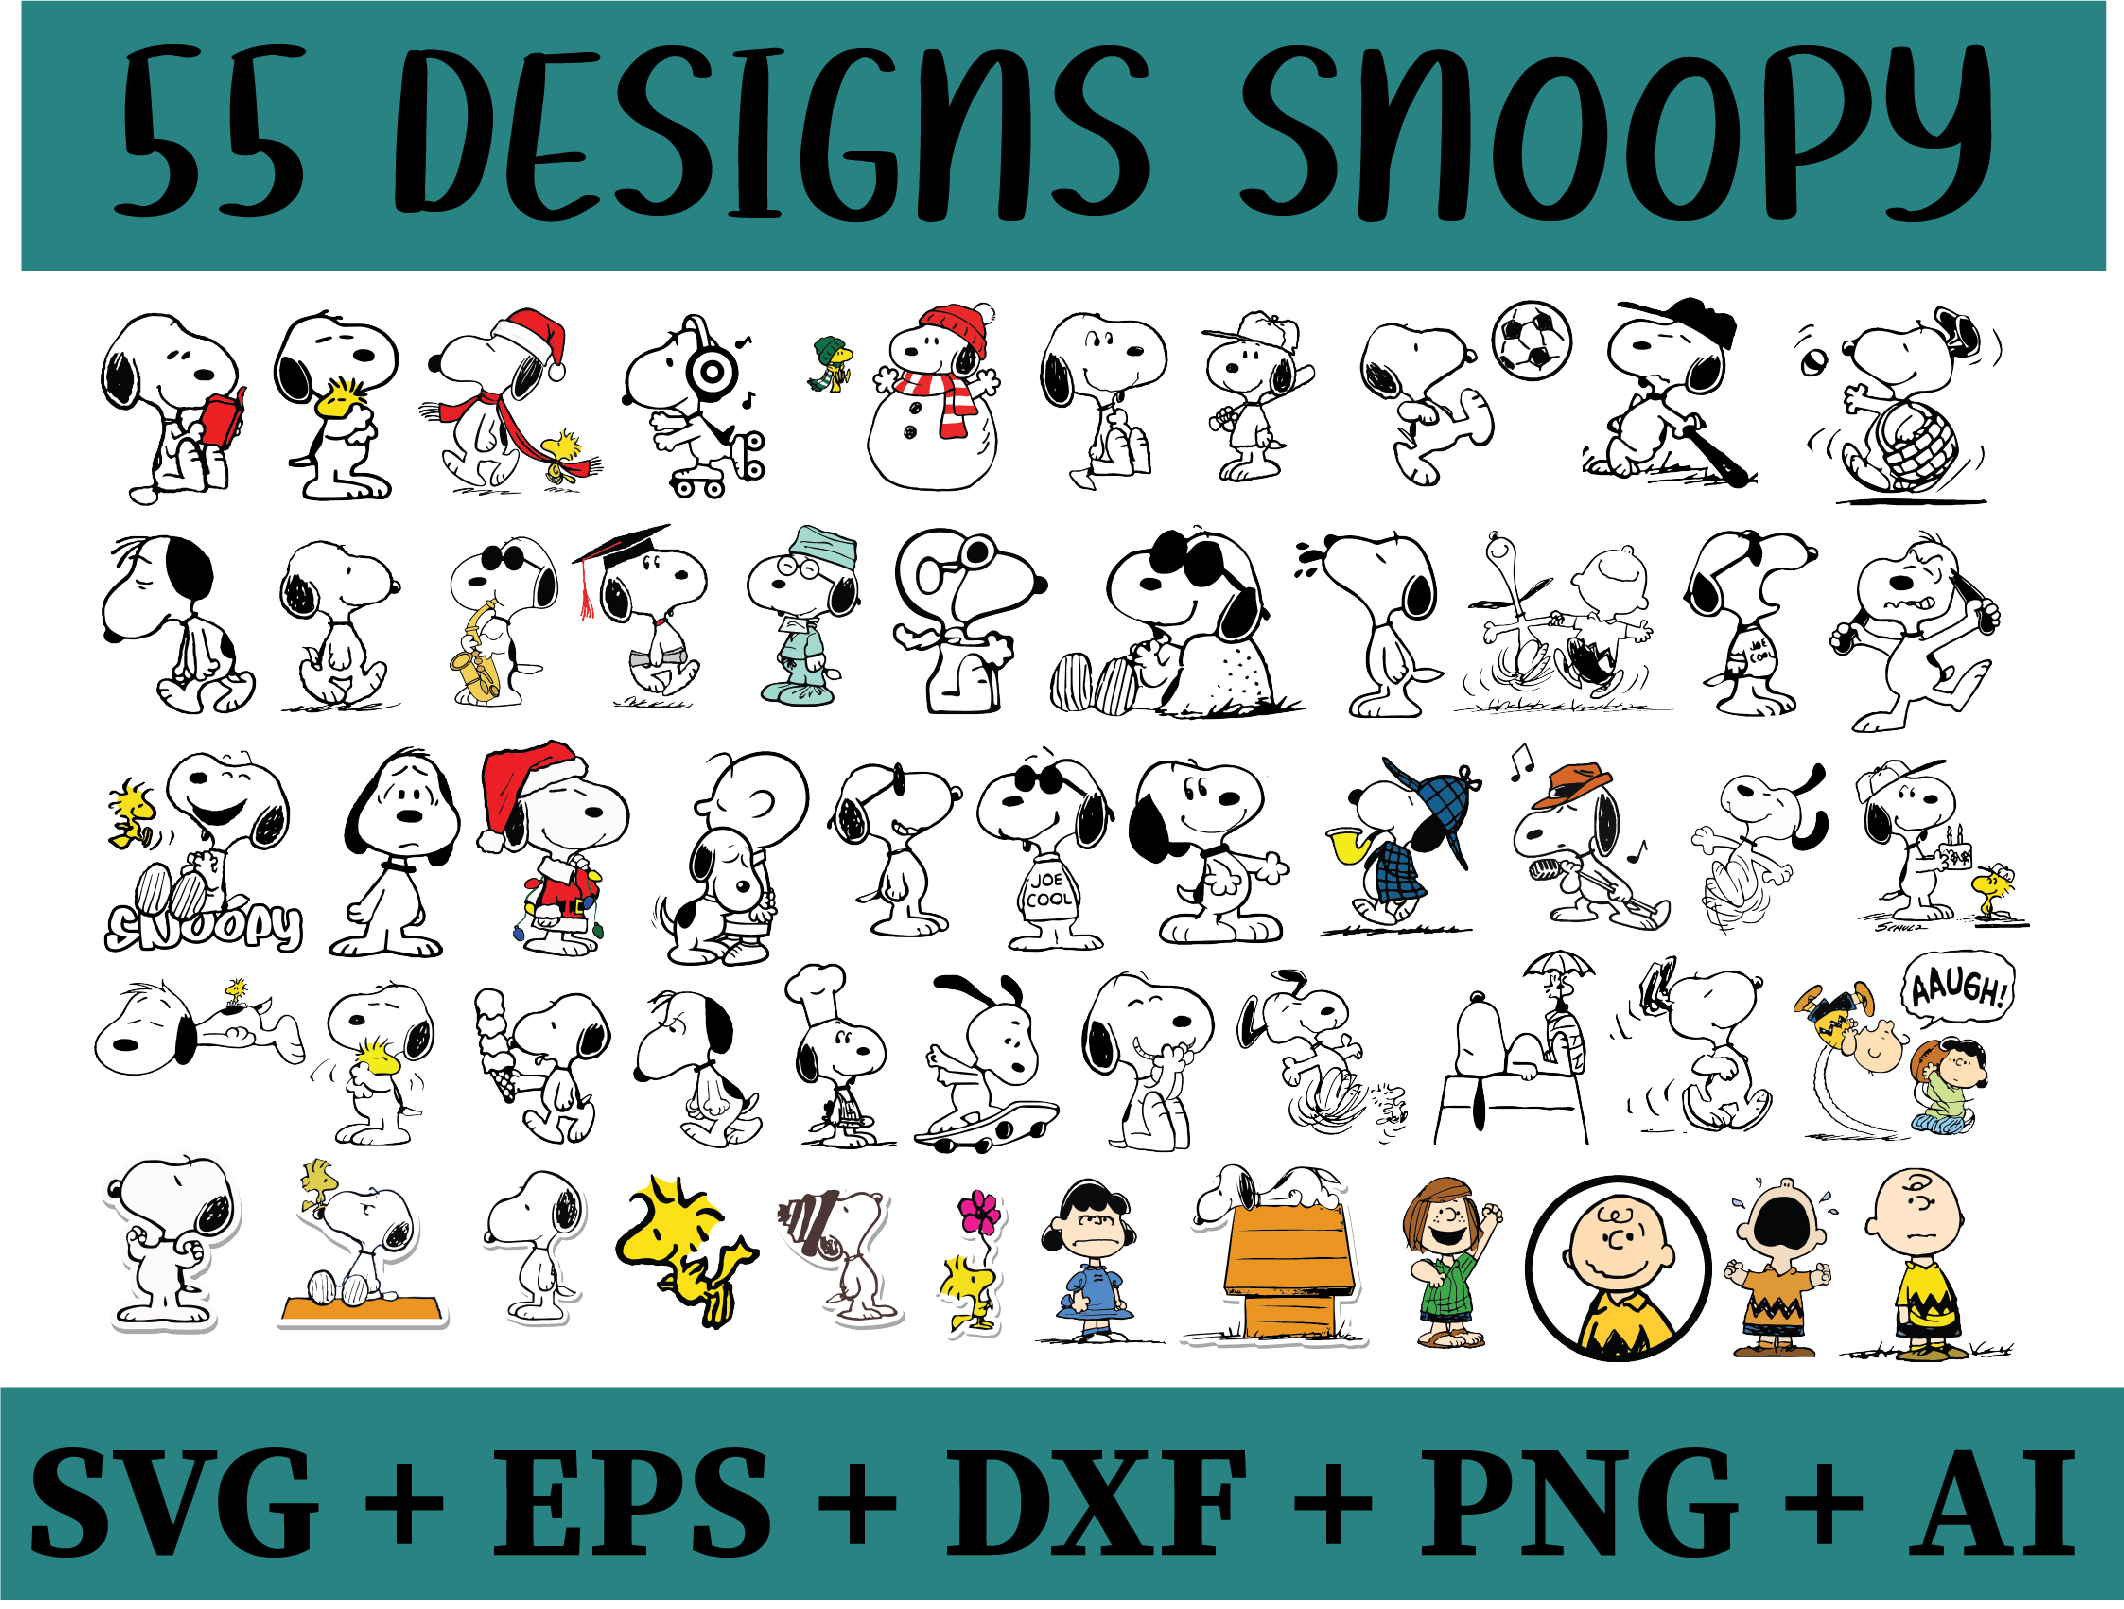 WTM SNOOPY Snoopy svg Cartoon svg Cartoon dog Svg files for Cricut Silhouette Vector File svg png eps dxf